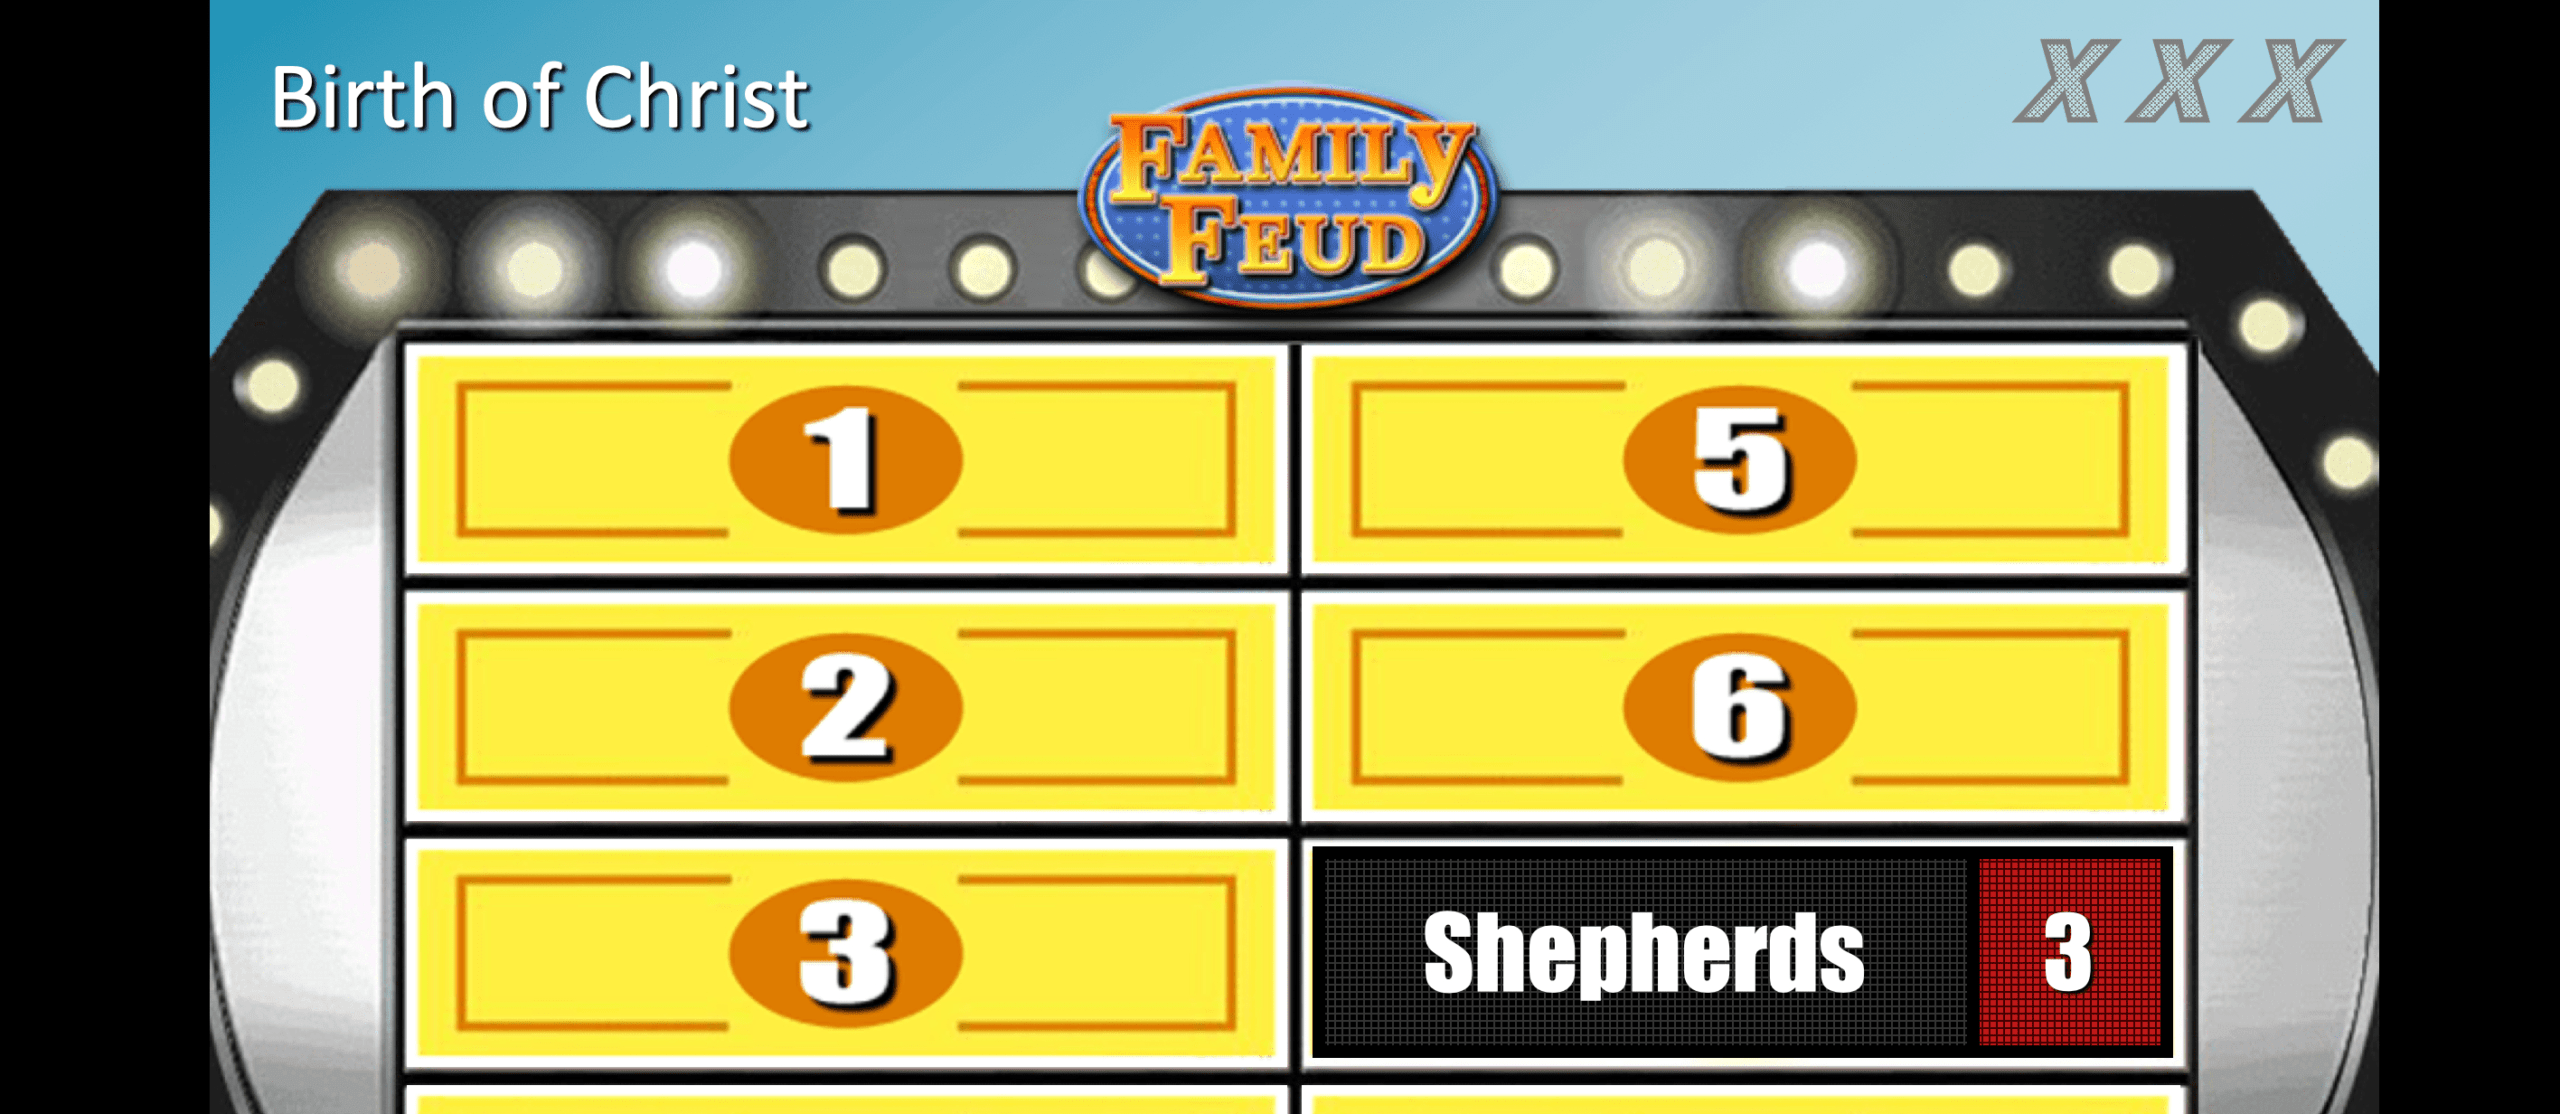 Family Feud Powerpoint – Horizonconsulting.co Throughout Family Feud Powerpoint Template With Sound